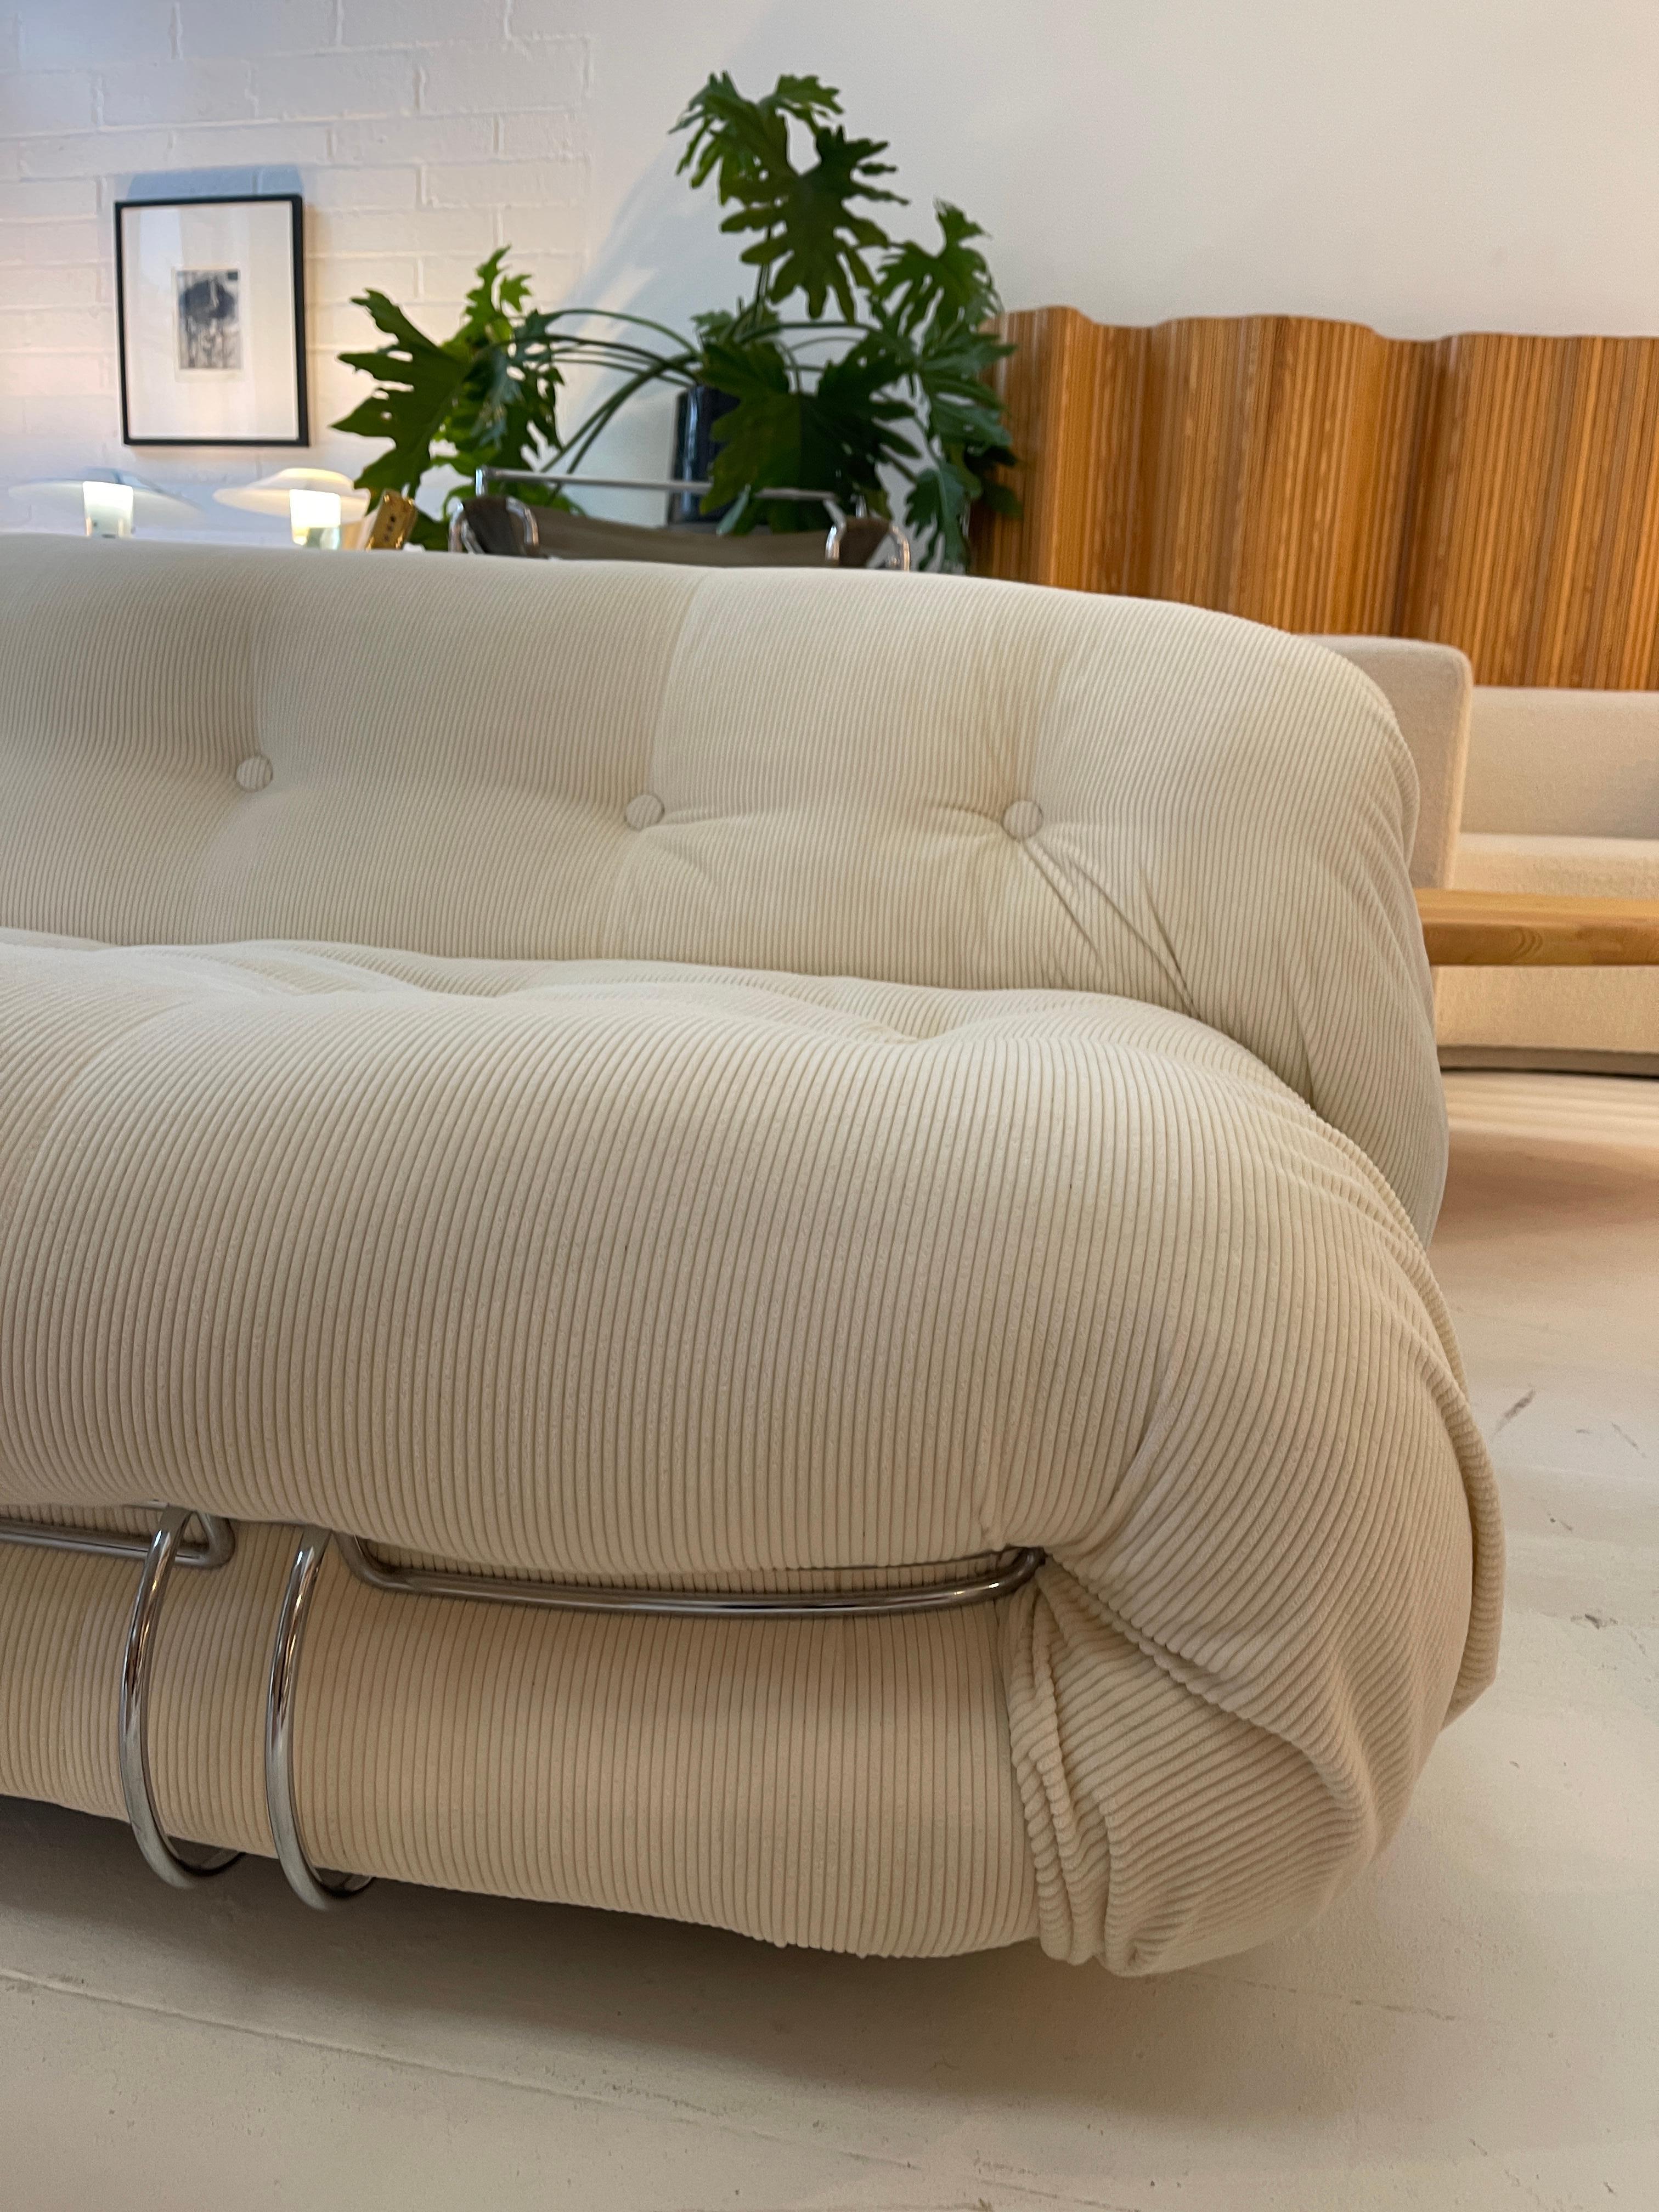 Soriana two-seater sofa by Afra and Tobia Scarpa for Cassina newly reupholstered in cream corduroy fabric.
    